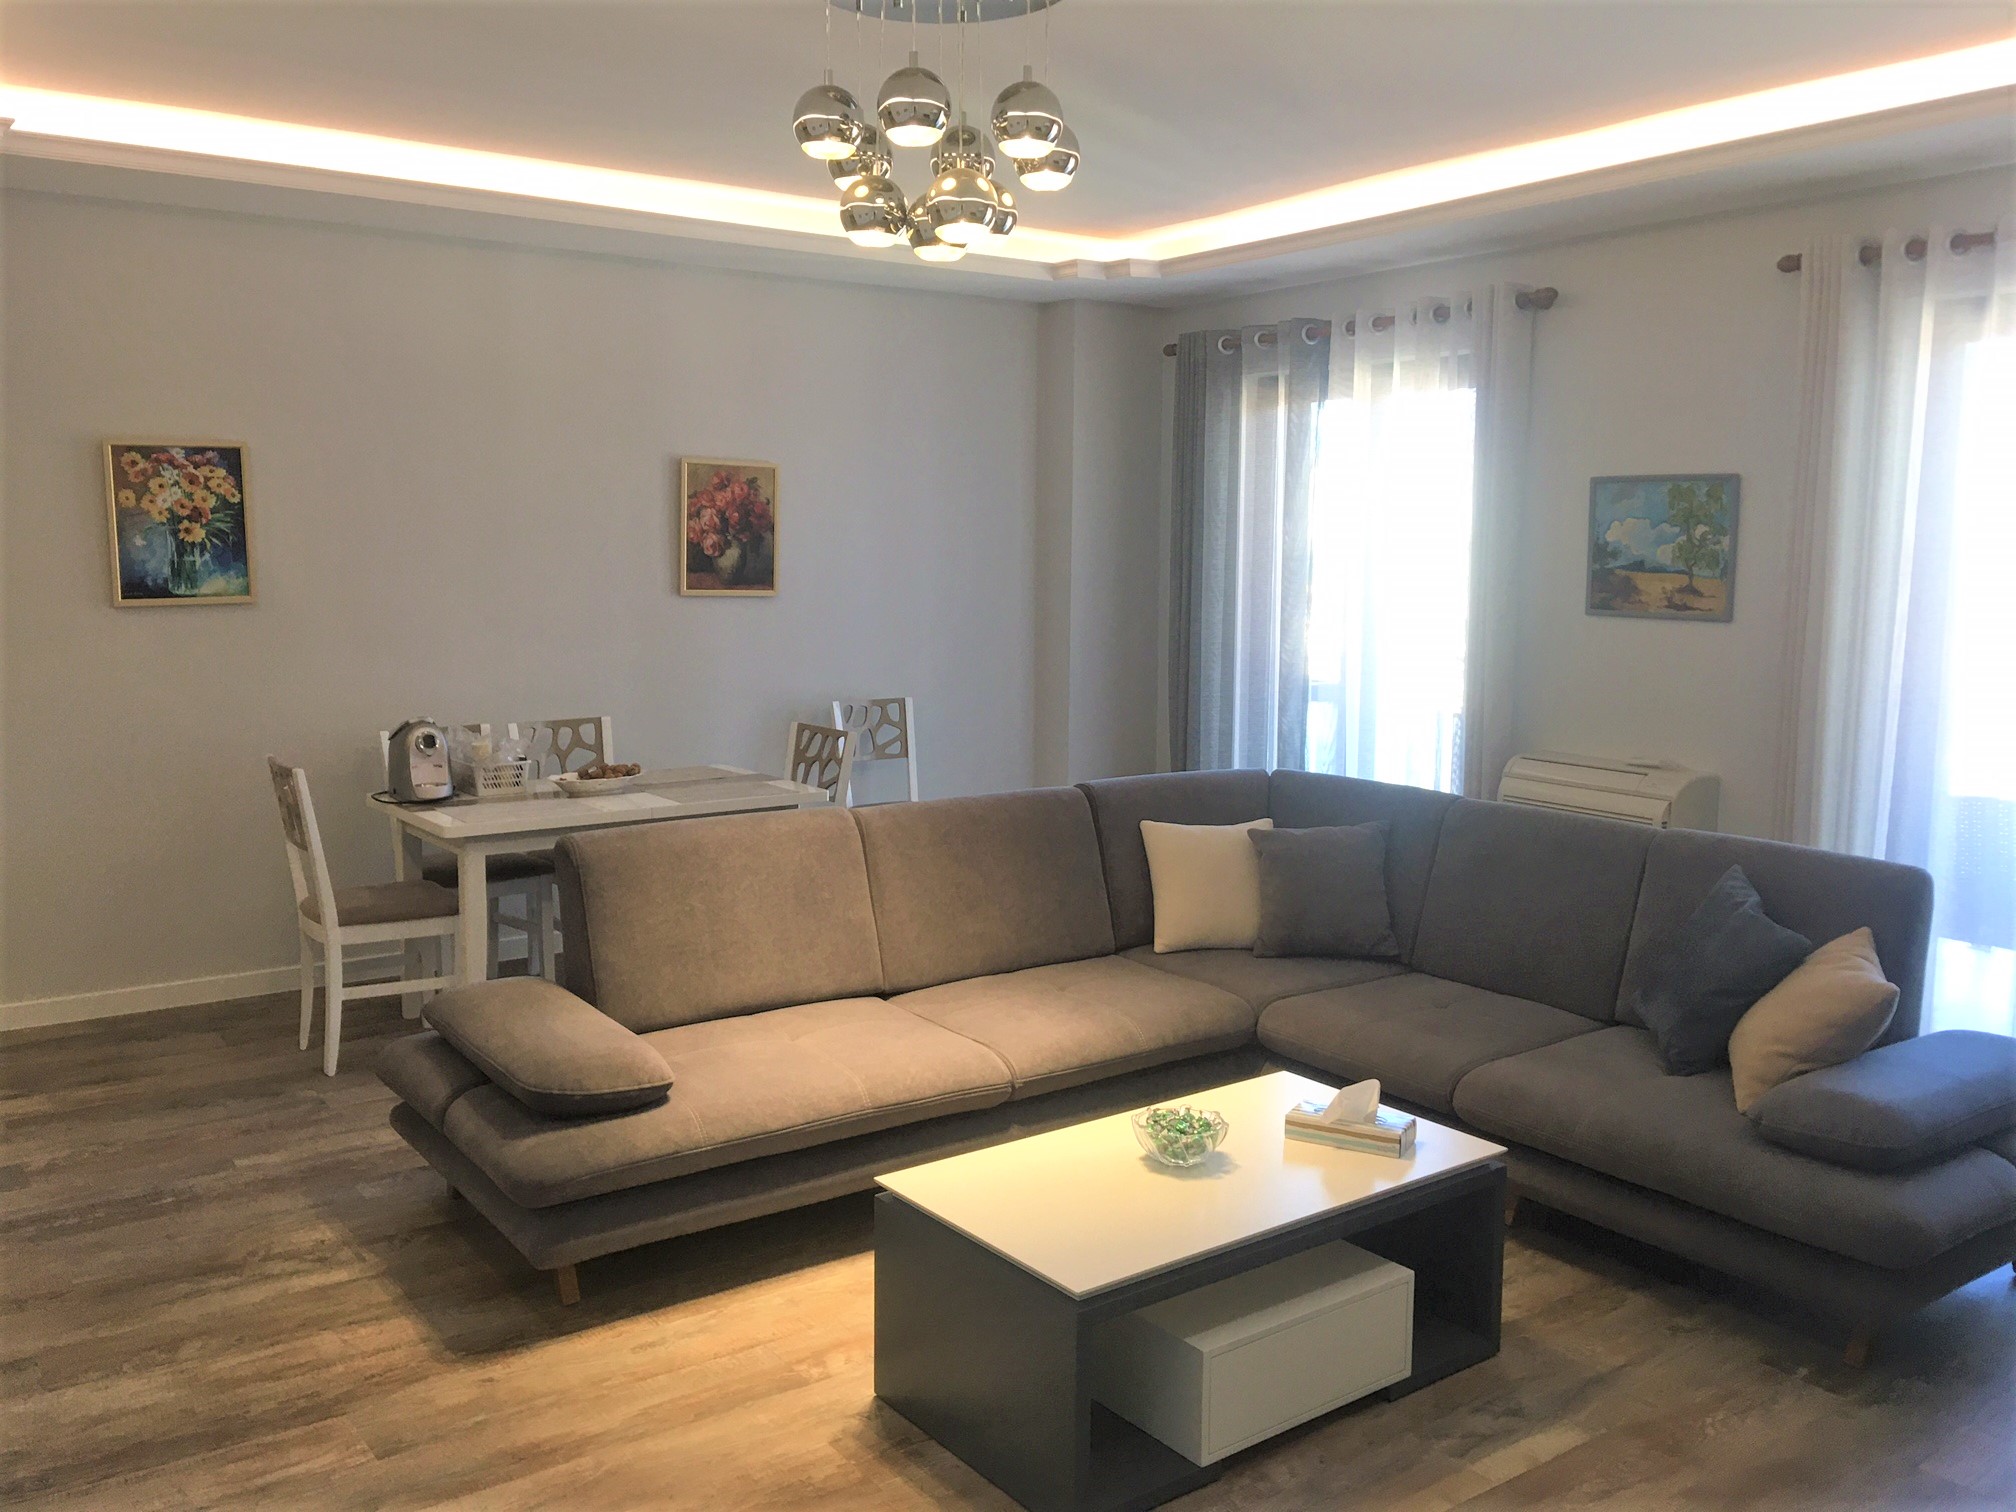 Apartment for rent in the center of Tirana near Skenderbej Square